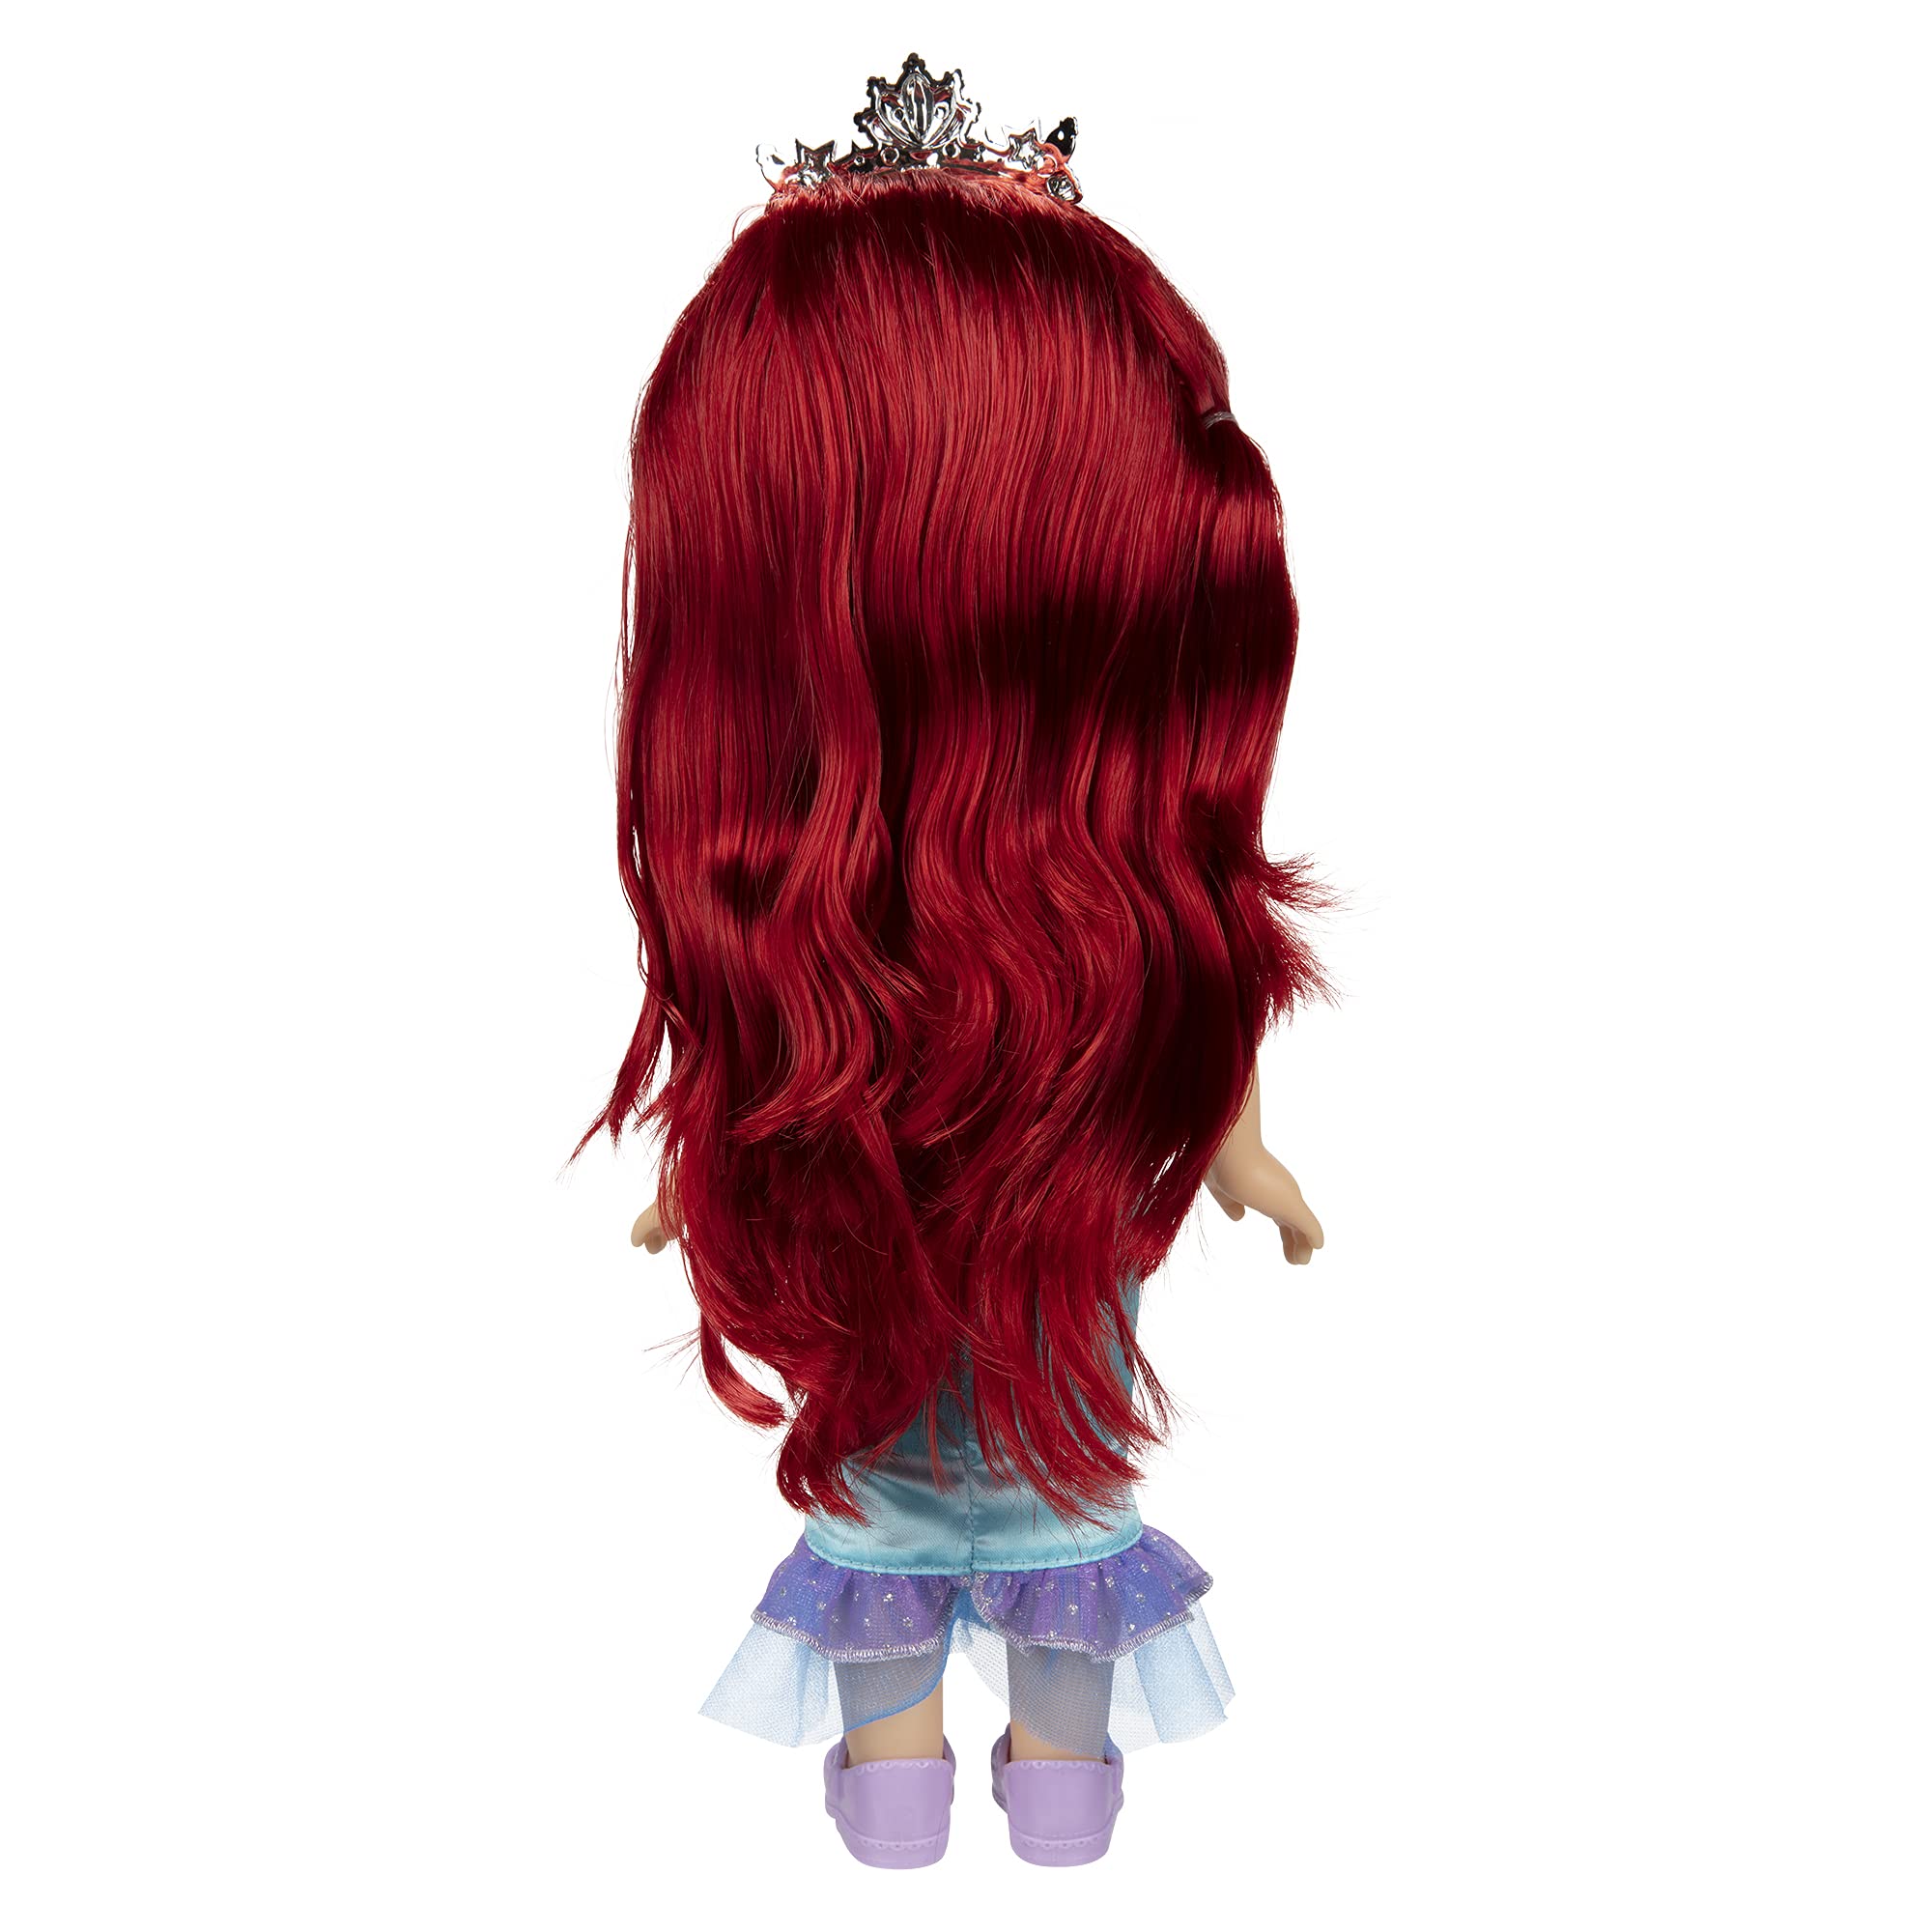 Disney Princess Ariel Doll Sing & Shimmer Toddler Doll, Sings Part of Your World [Amazon Exclusive]